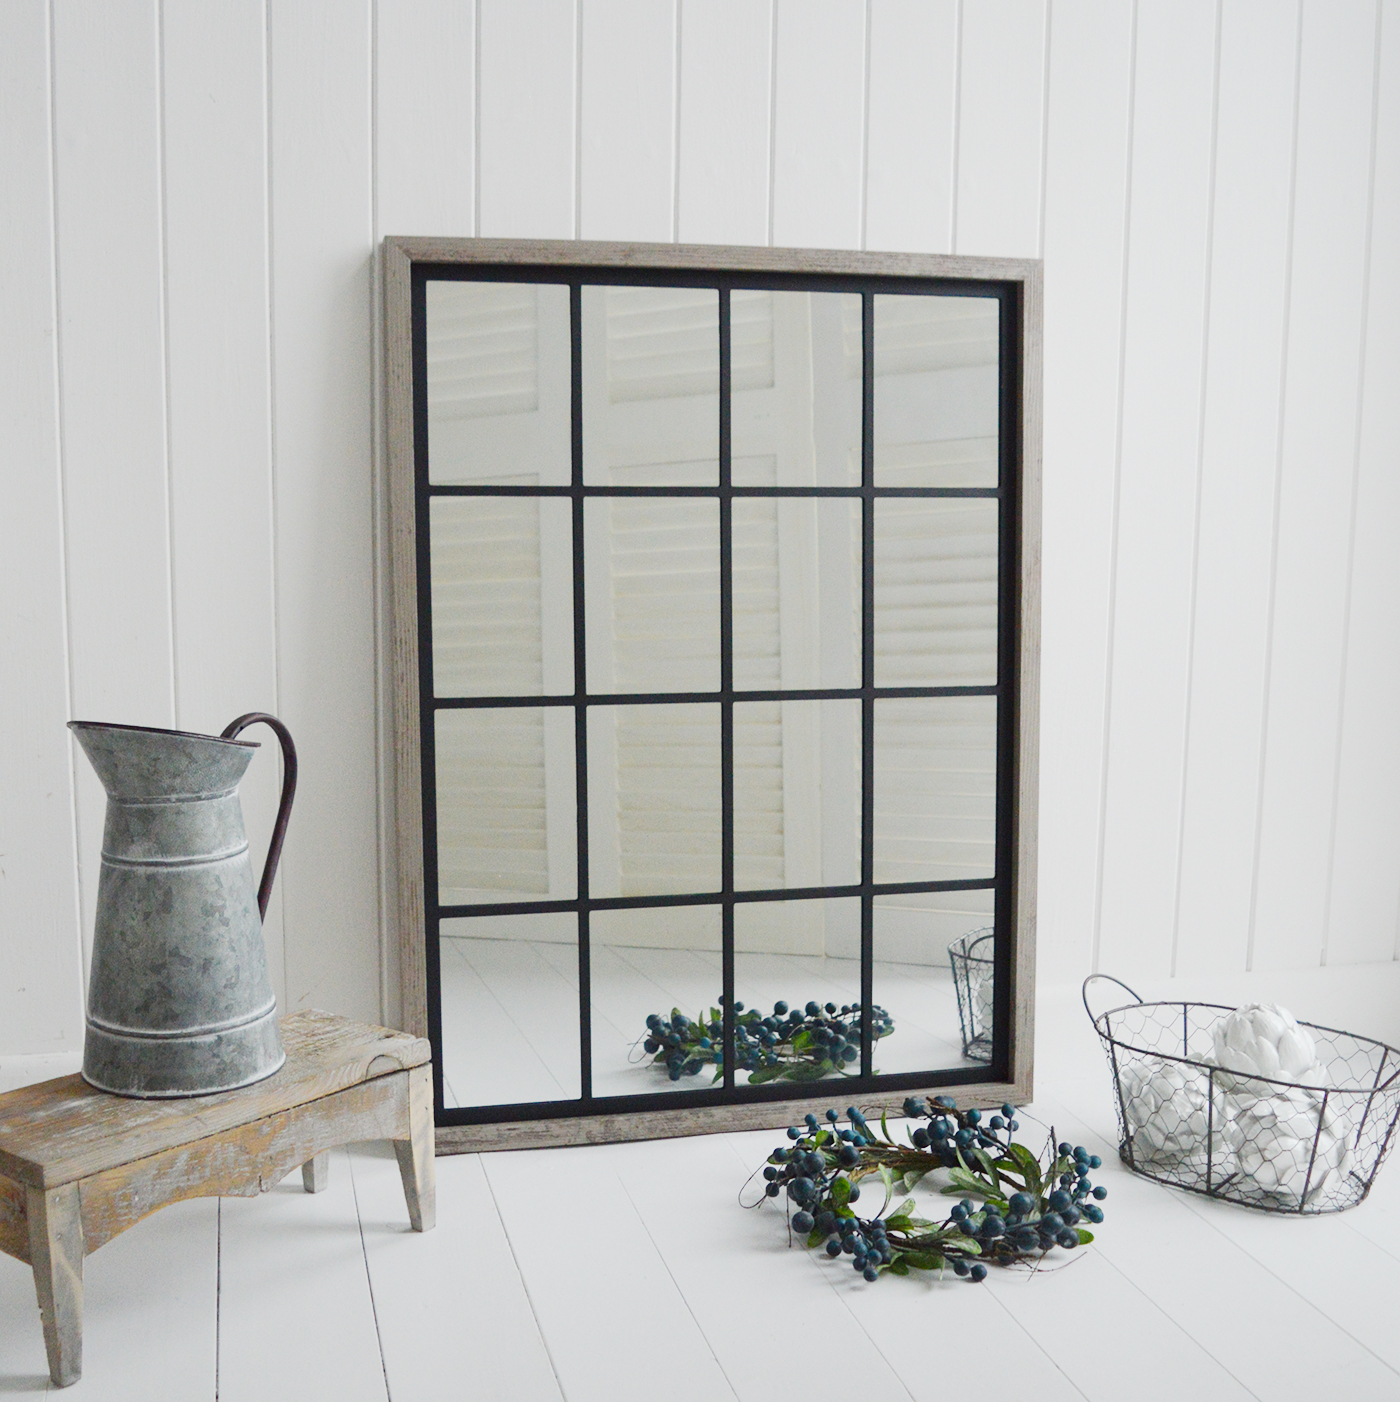 Halifax Grey window mirror  for New England country, coastal and white home interiors. New England Furniture and Interiors